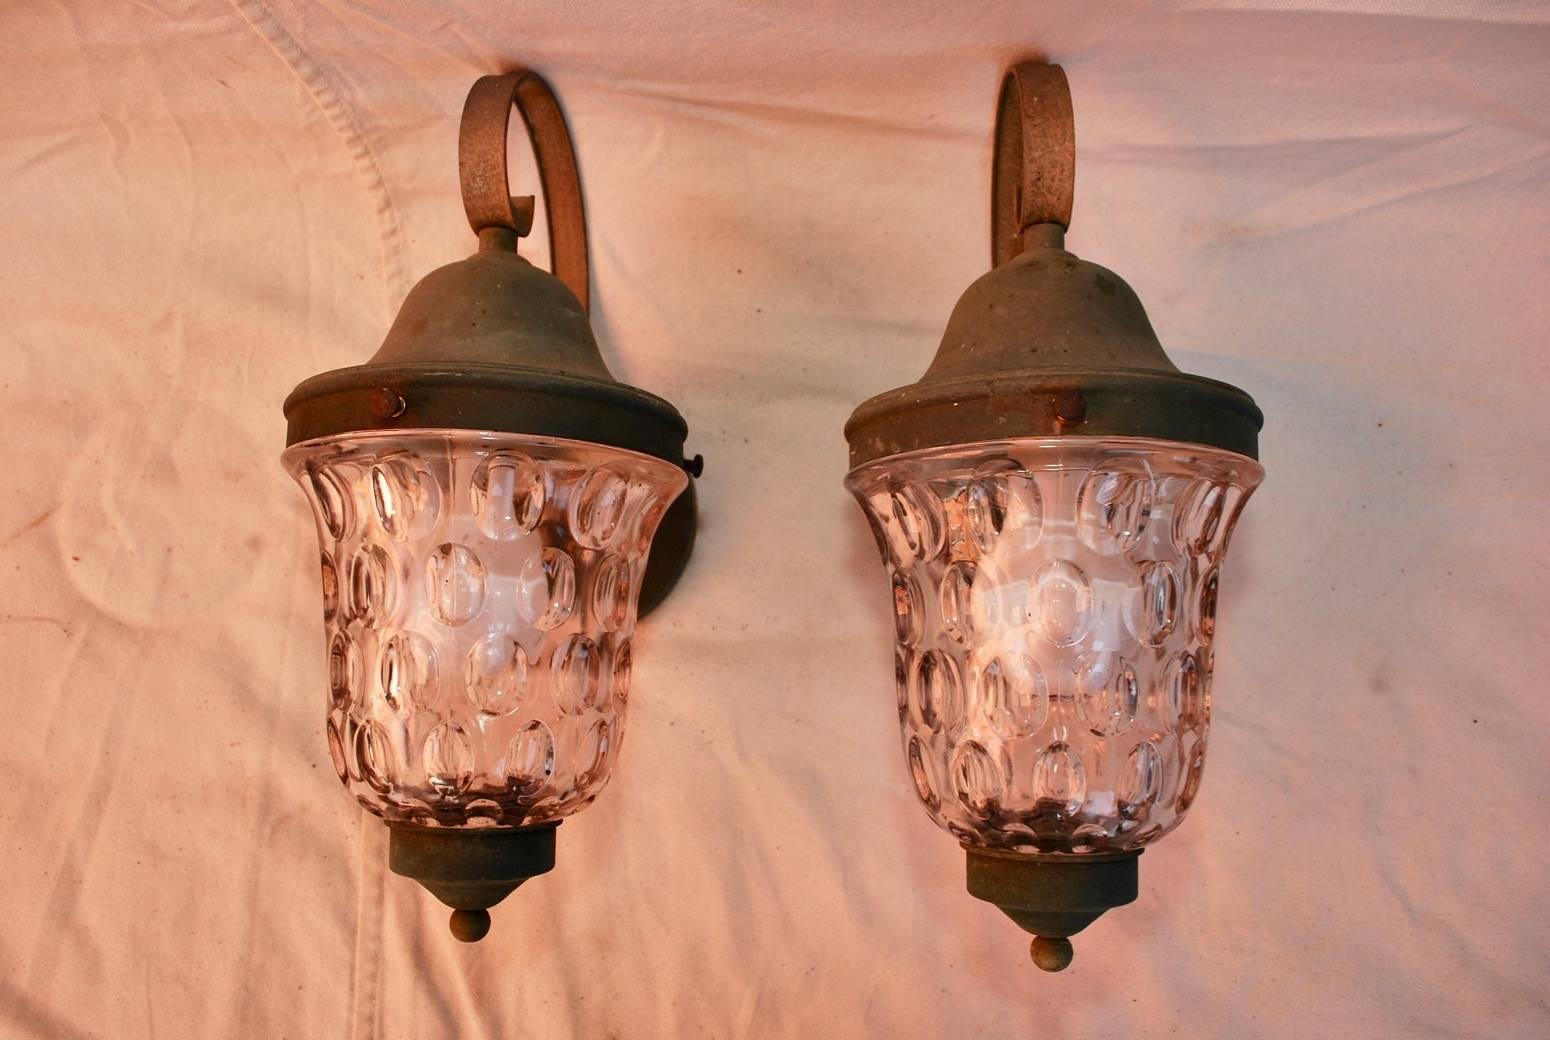 A nice outdoor sconces, the glass is made of a nice quality.

 